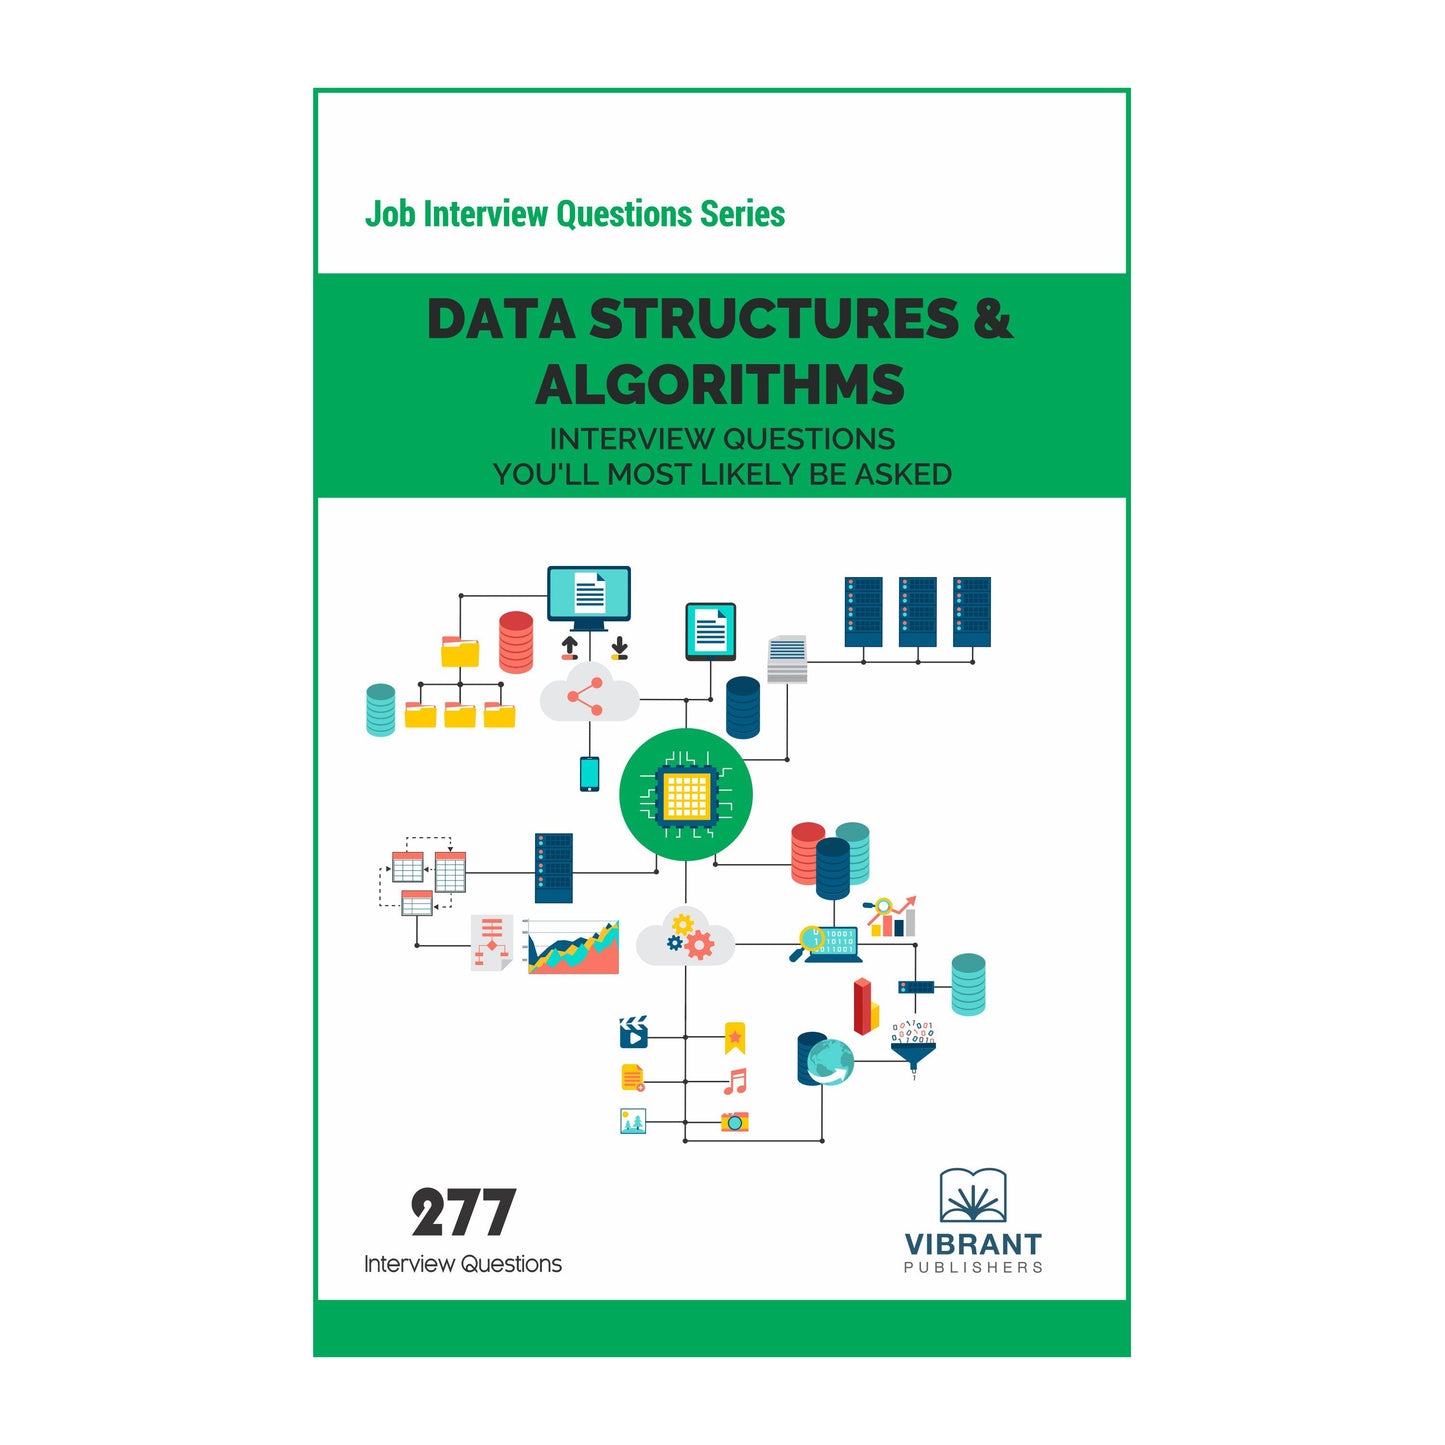 Data Structures & Algorithms Interview Questions You’ll Most Likely Be Asked